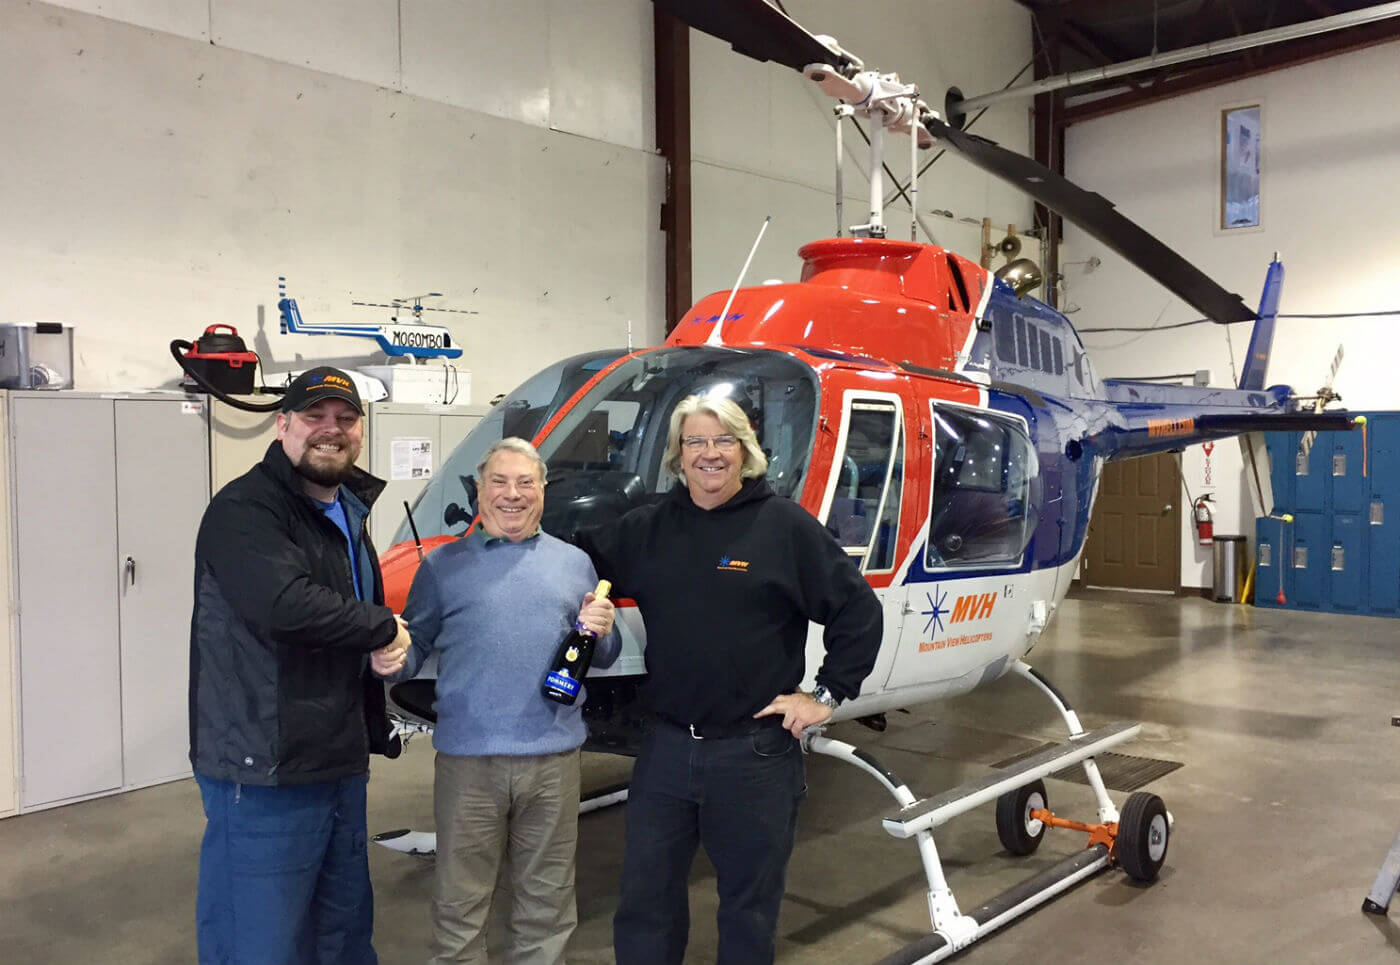 Richard Alzetta (middle) “semi-retired” in 2011, but still instructs part-time, flying about 300 to 400 hours a year. Here, he celebrates his landmark with Paul Bergeron (right), Mountain View Helicopters president. Mountain View Helicopters Photos